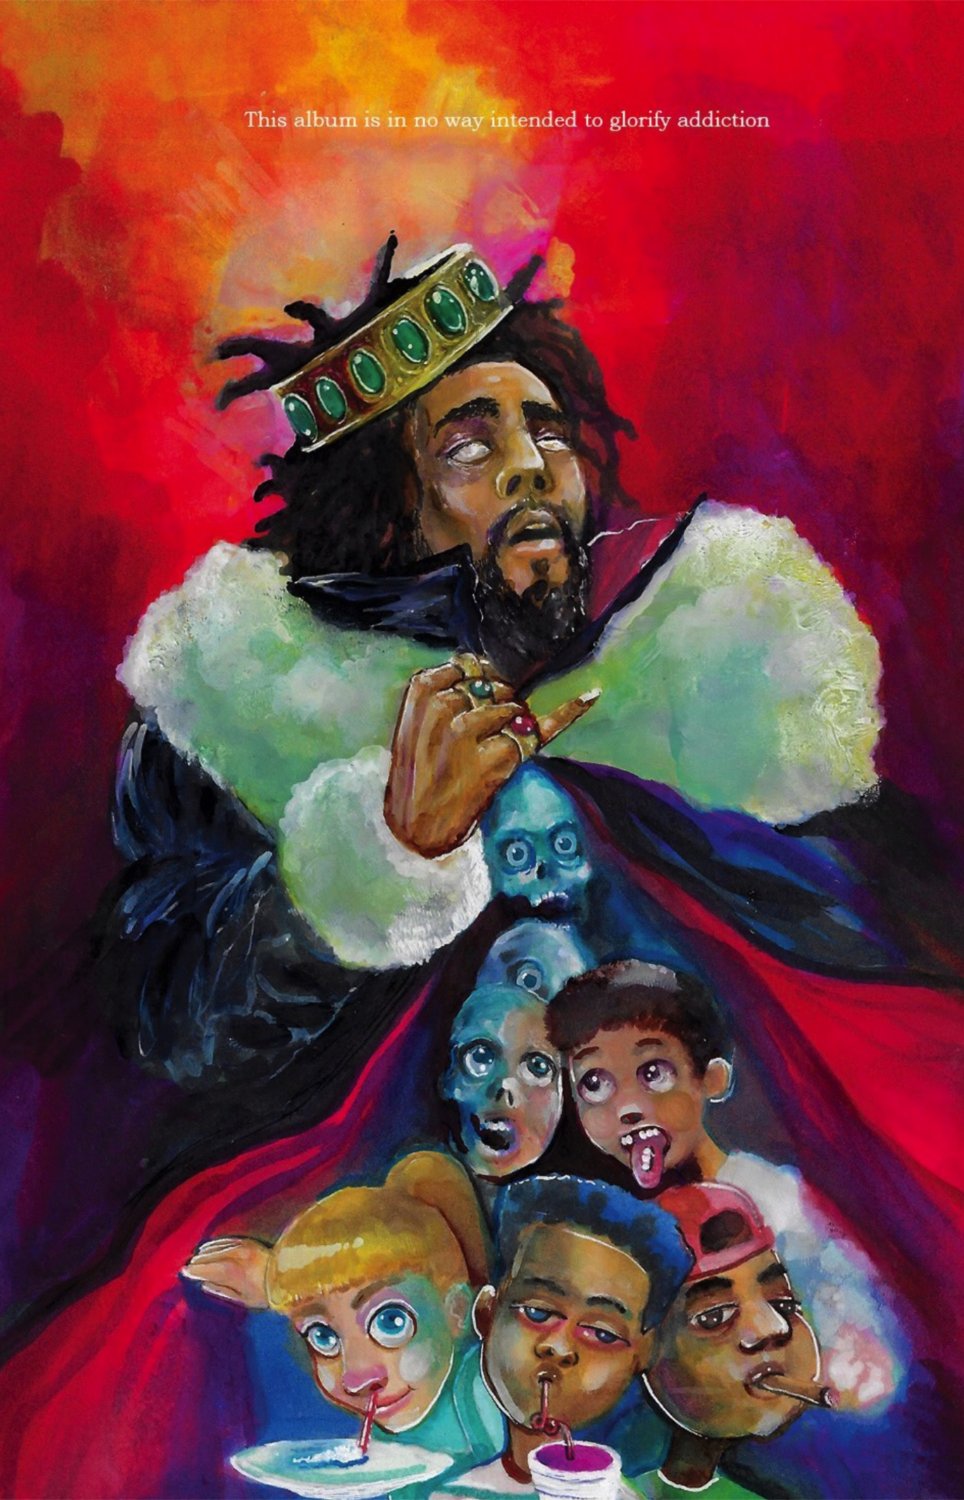 J. Cole K.O.D. 13"x19" (32cm/49cm) Polyester Fabric Poster